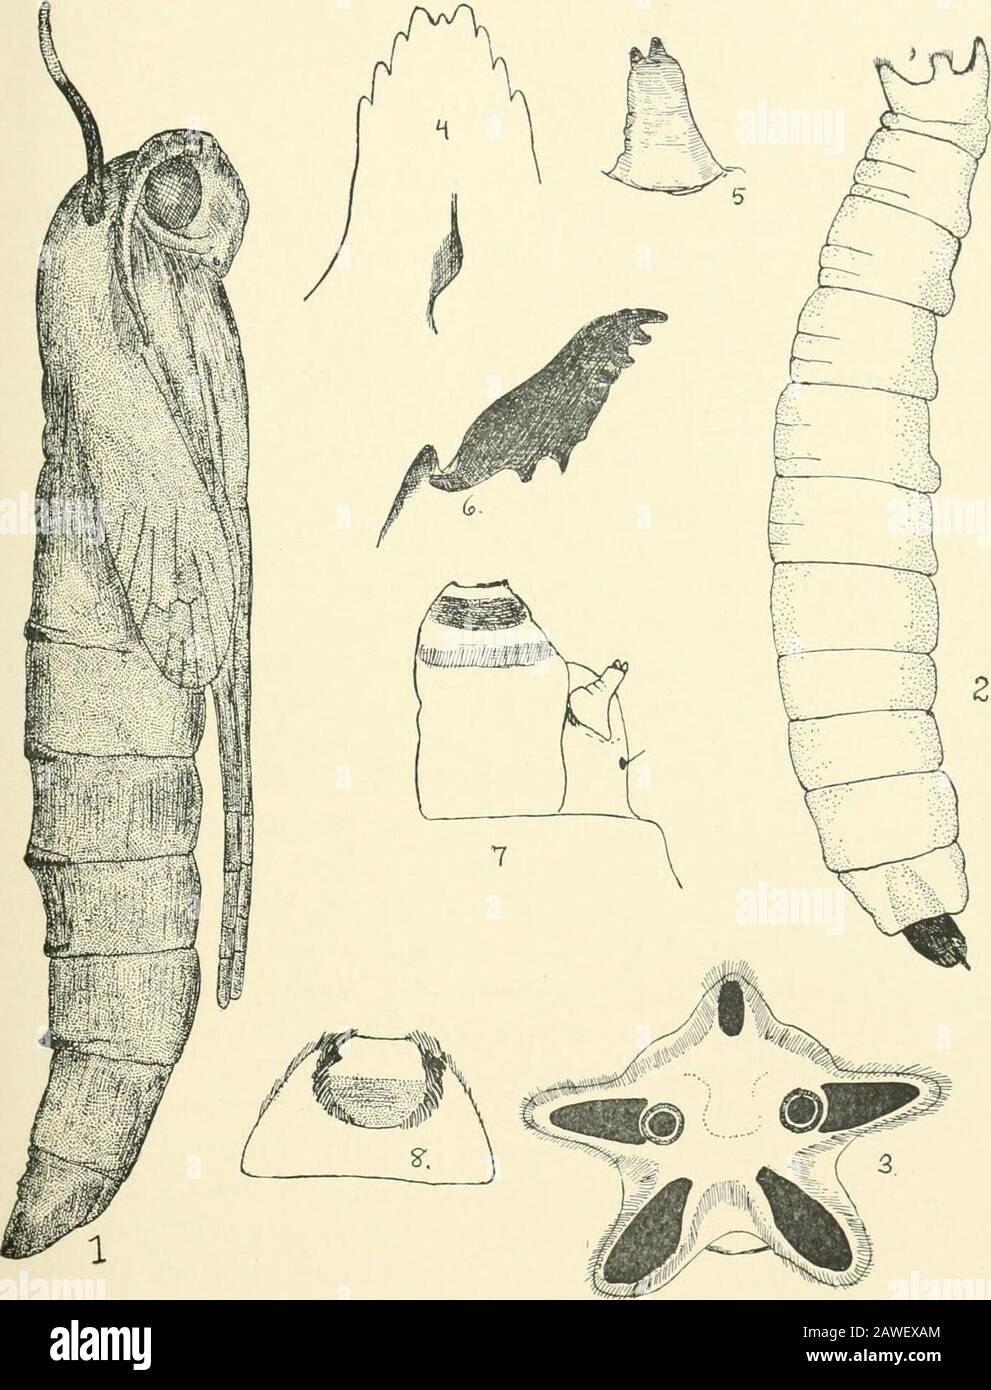 Journal of entomology and zoology . The thoracicdorsum and abdomen are rather light yellowish brown. The pro-notal breathing horns are very conspicuous, dark brown basally,passing into a bright light yellow on the apical third or quarter.The mesonotal praescutum retains its light coloration even in oldpupae and those preserved in alcohol. Length: Total, 6.4-7 mm. Dextro-sinistral wicith at the wing-pad: 1.2-1.3 mm. Dorso-ventral depth at the wing-pad: 1.2-1.6 mm. Larva and pupa described from material preserved at Ithaca,N. Y., on October 15, 1912. JOUENAL OF ENTOMOLOGY AND ZOOLOGY i !, EXPLAN Stock Photo